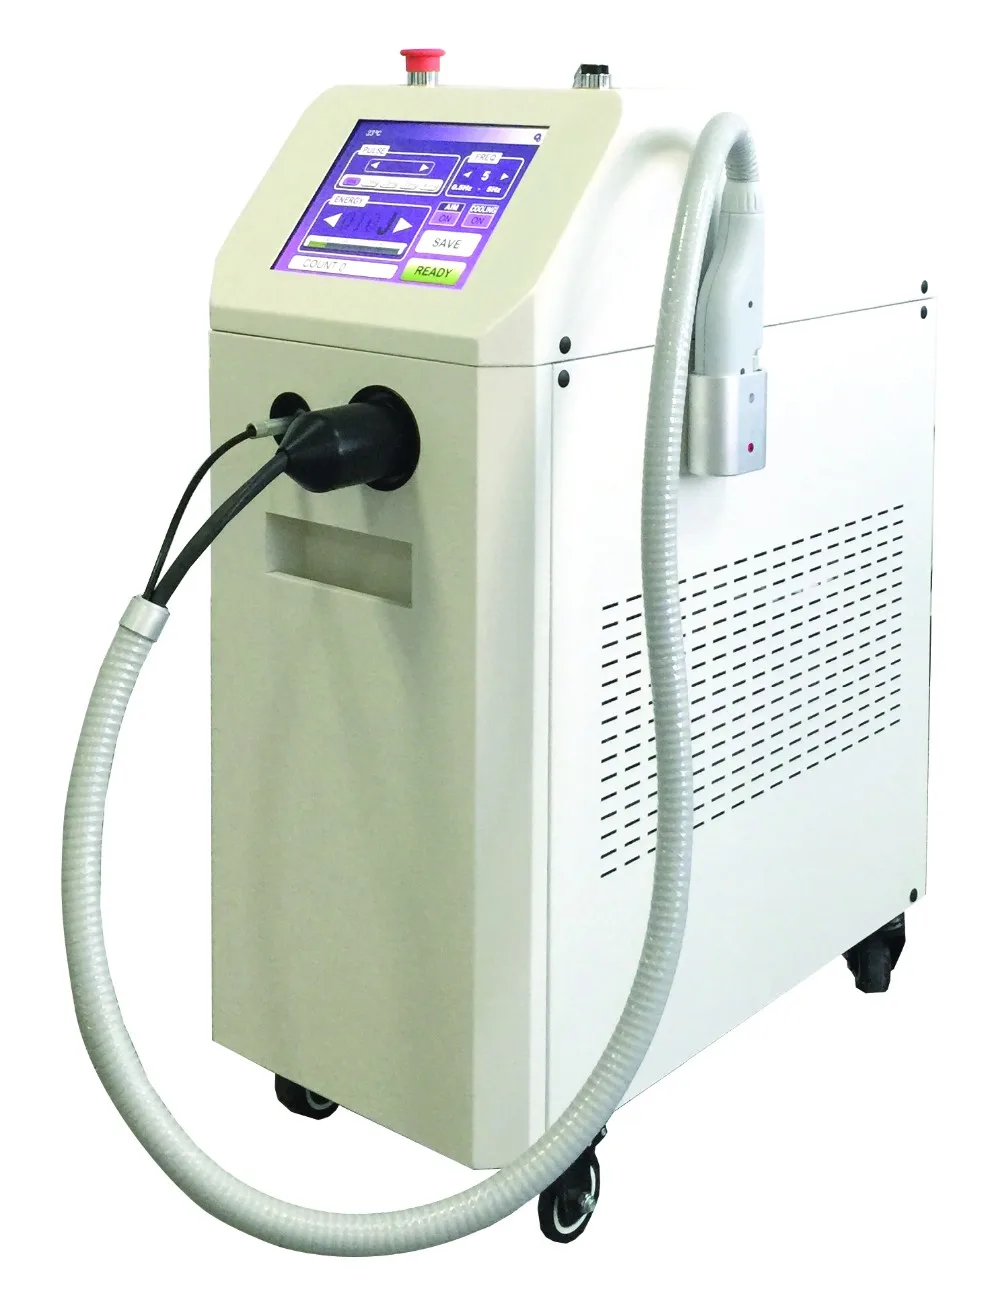 2017 Newest Technology 1064 755 Nd Yag Laser Hair Removal Buy